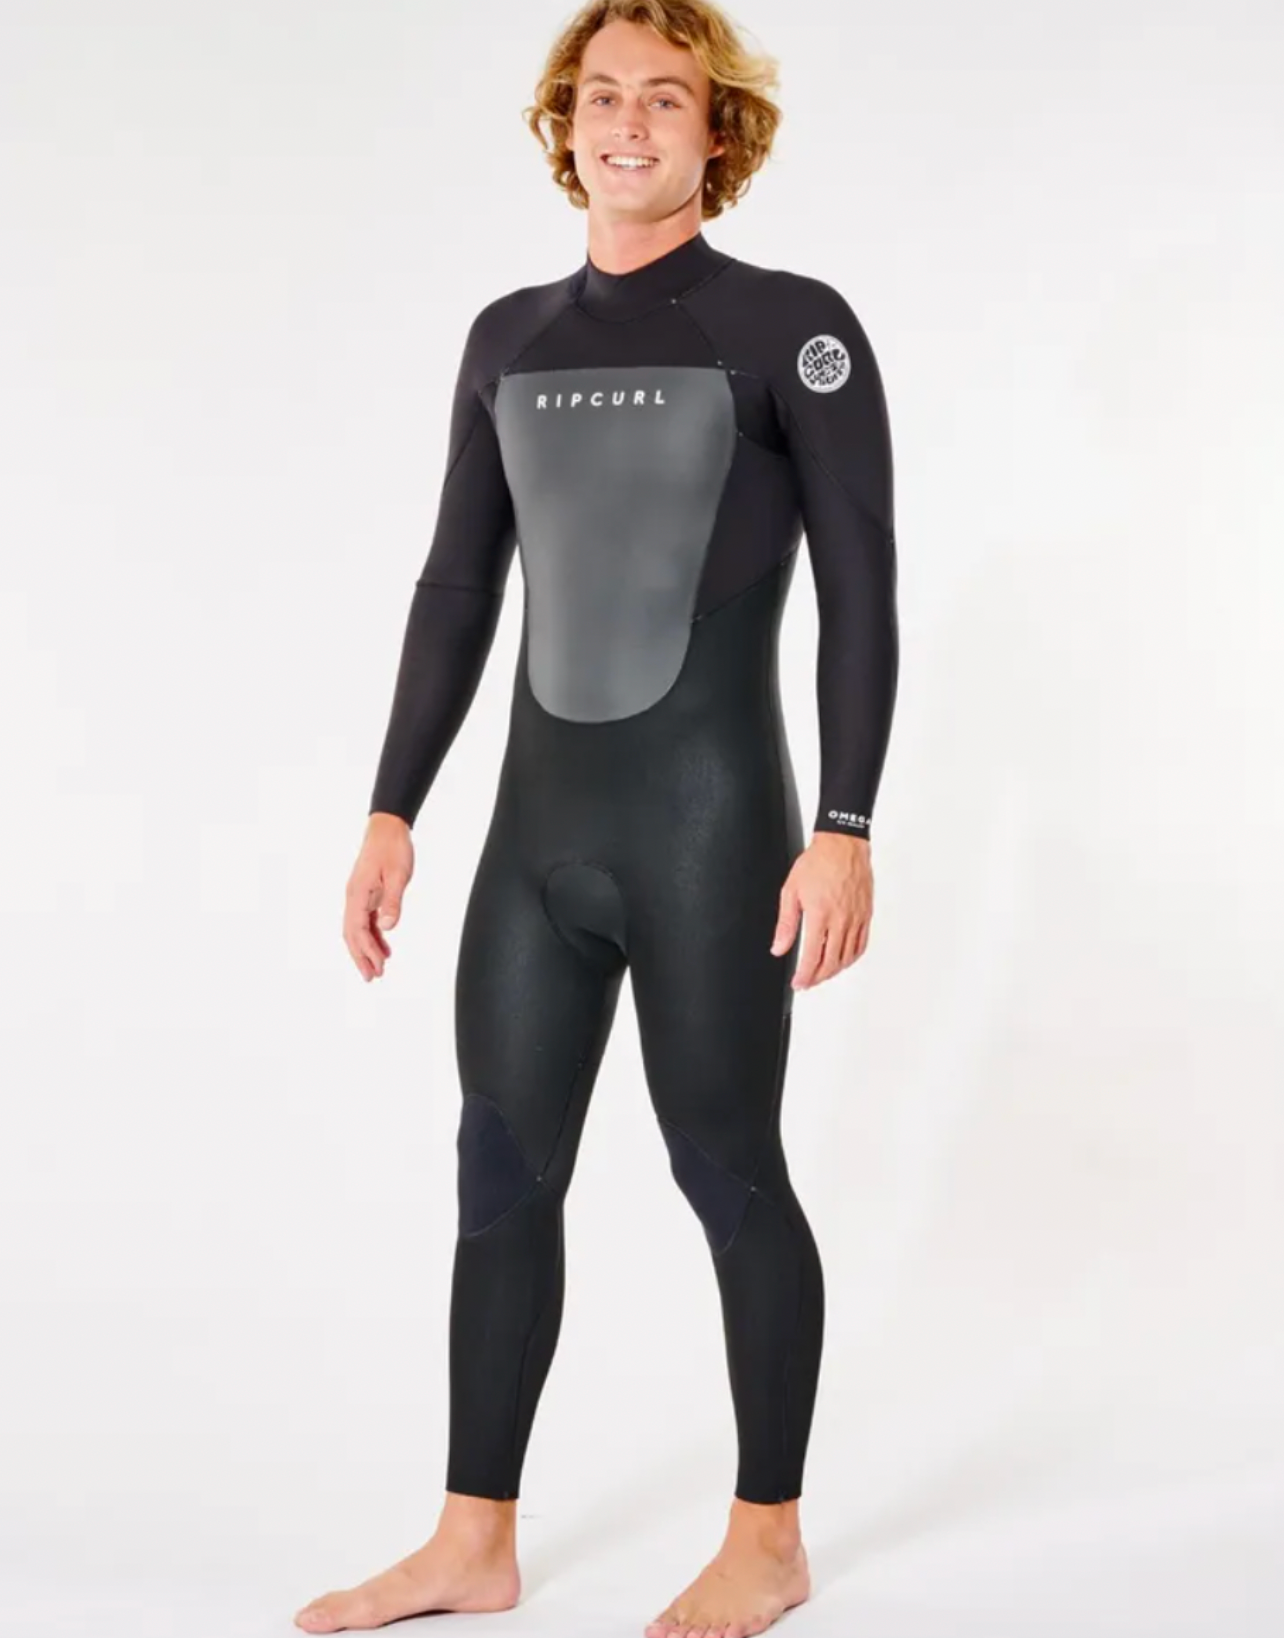 Daily 3hr+ (up to 24 Hour) / Flat Rate Wetsuit Rental